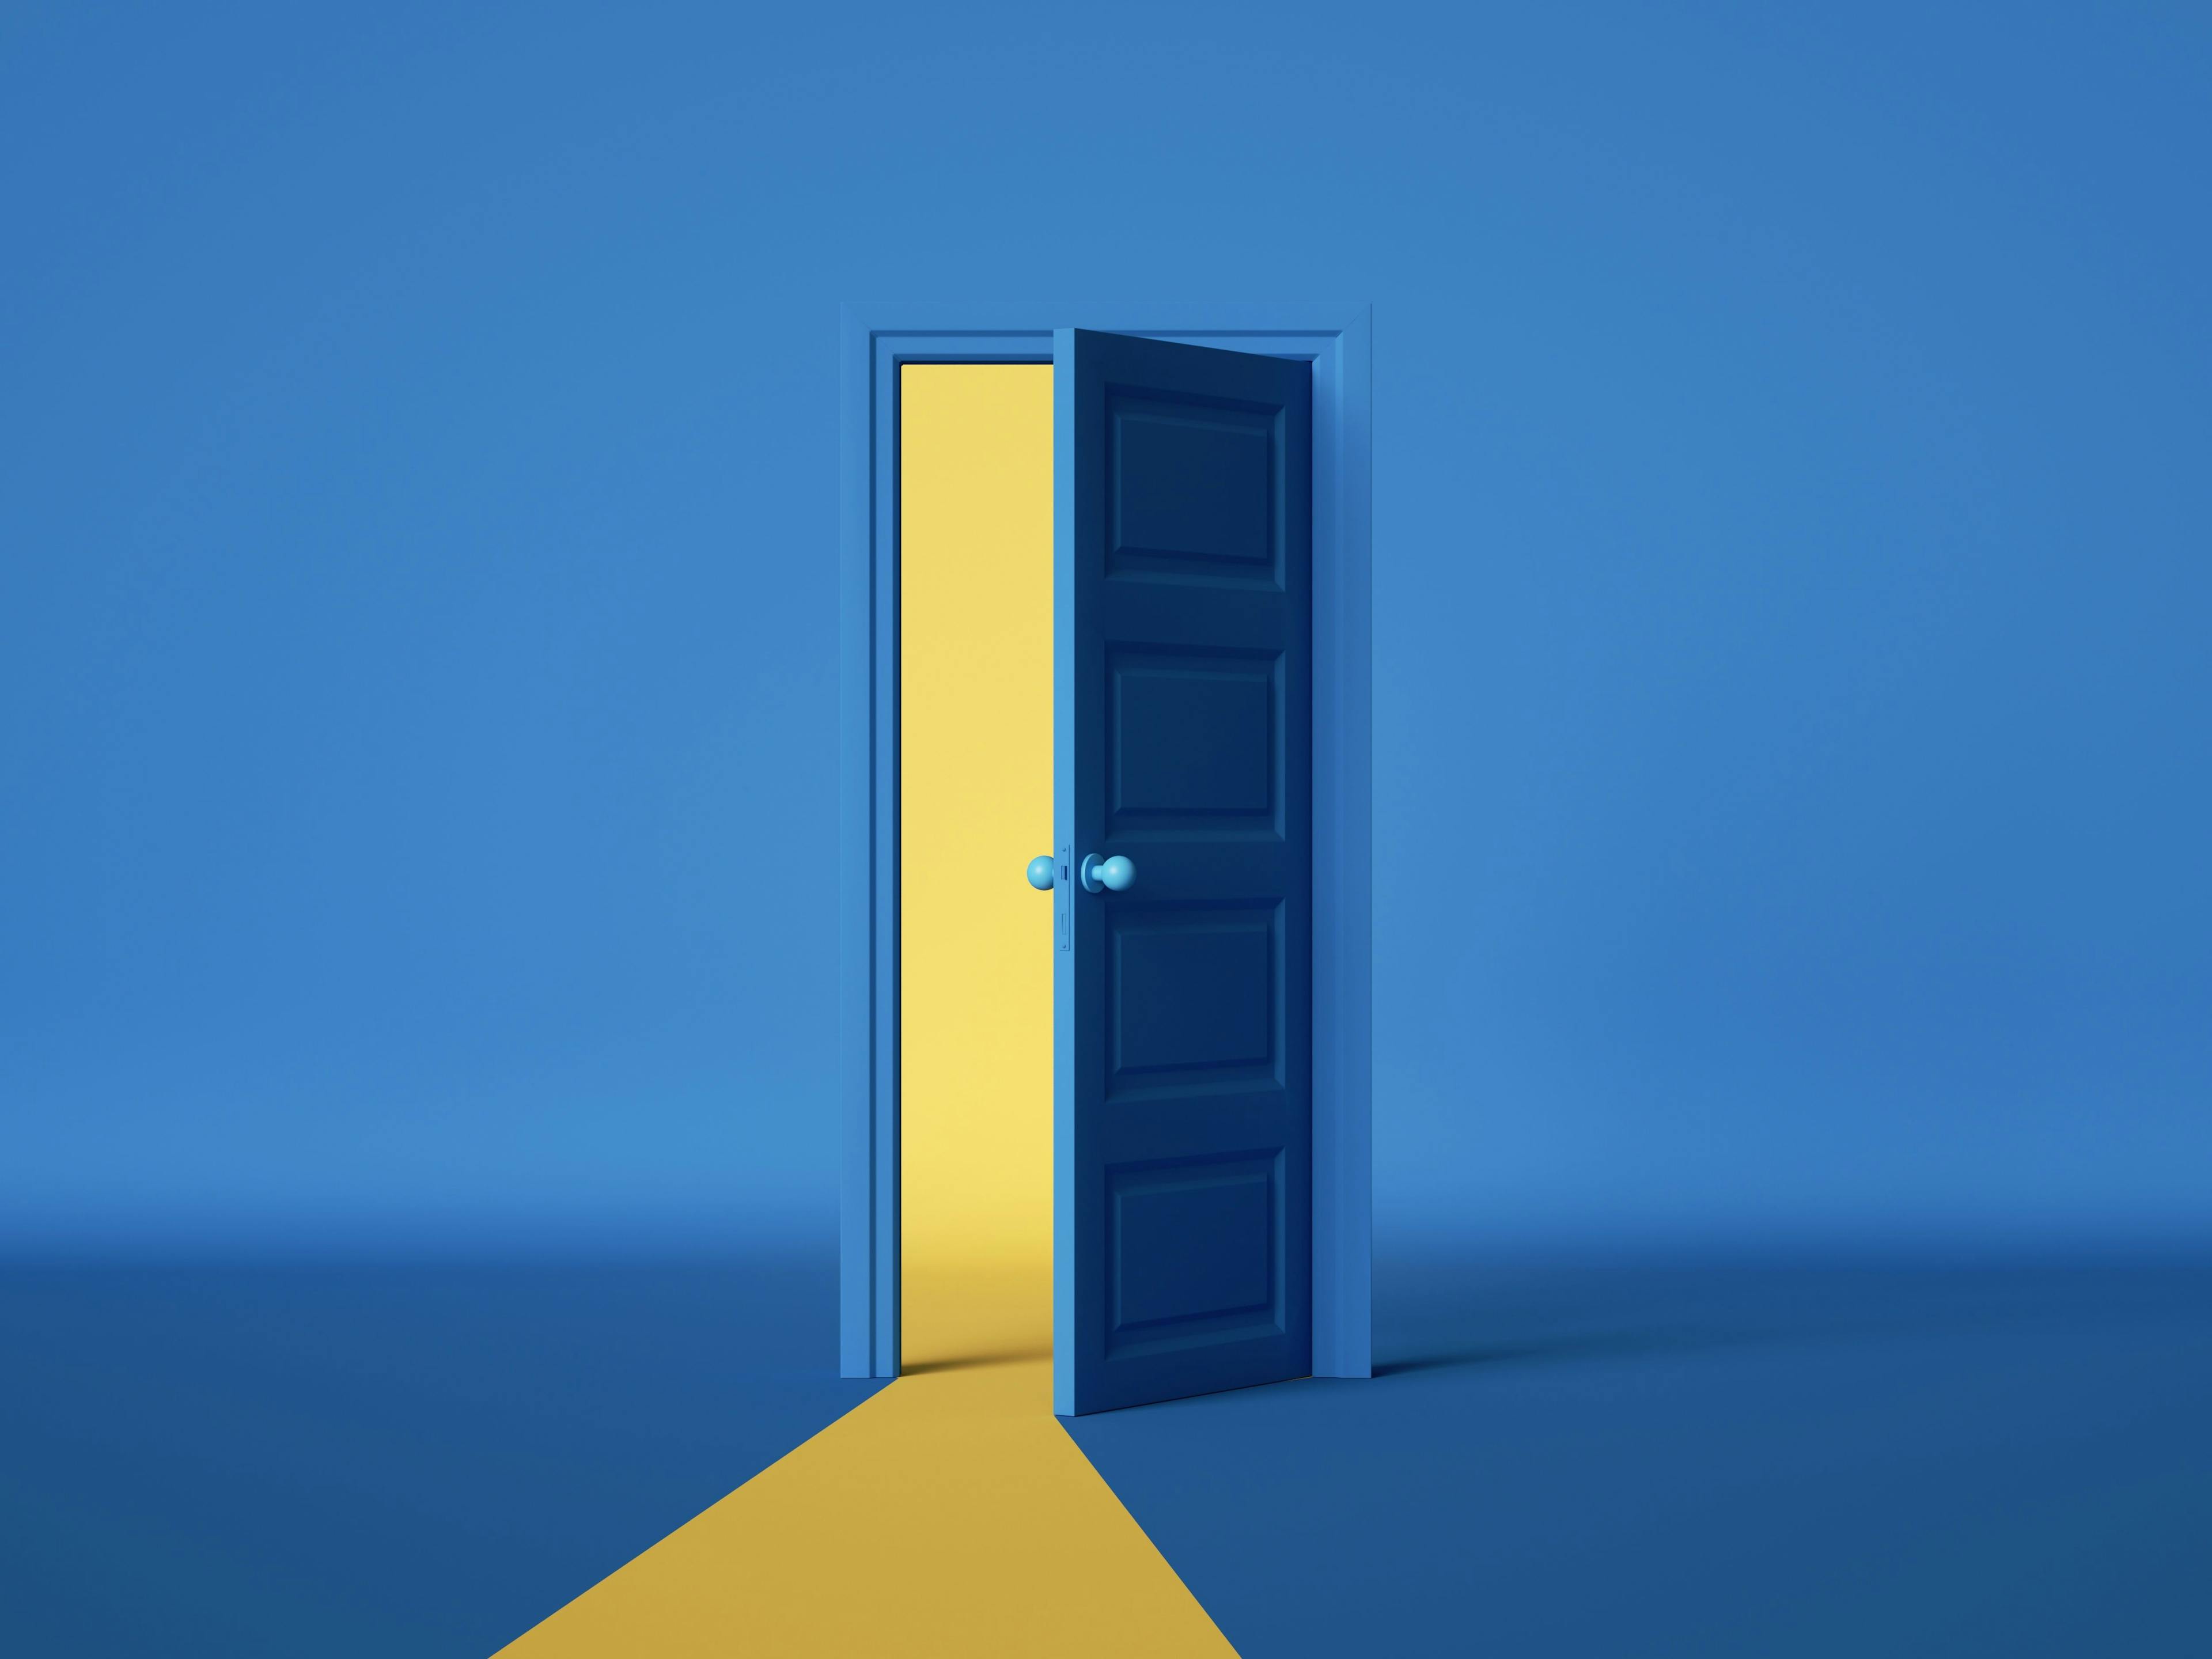 3d render, yellow light going through the open door isolated on blue background. Architectural design element. Modern minimal concept. Opportunity metaphor.  | Image credit: © NeoLeo - © stock.adobe.com